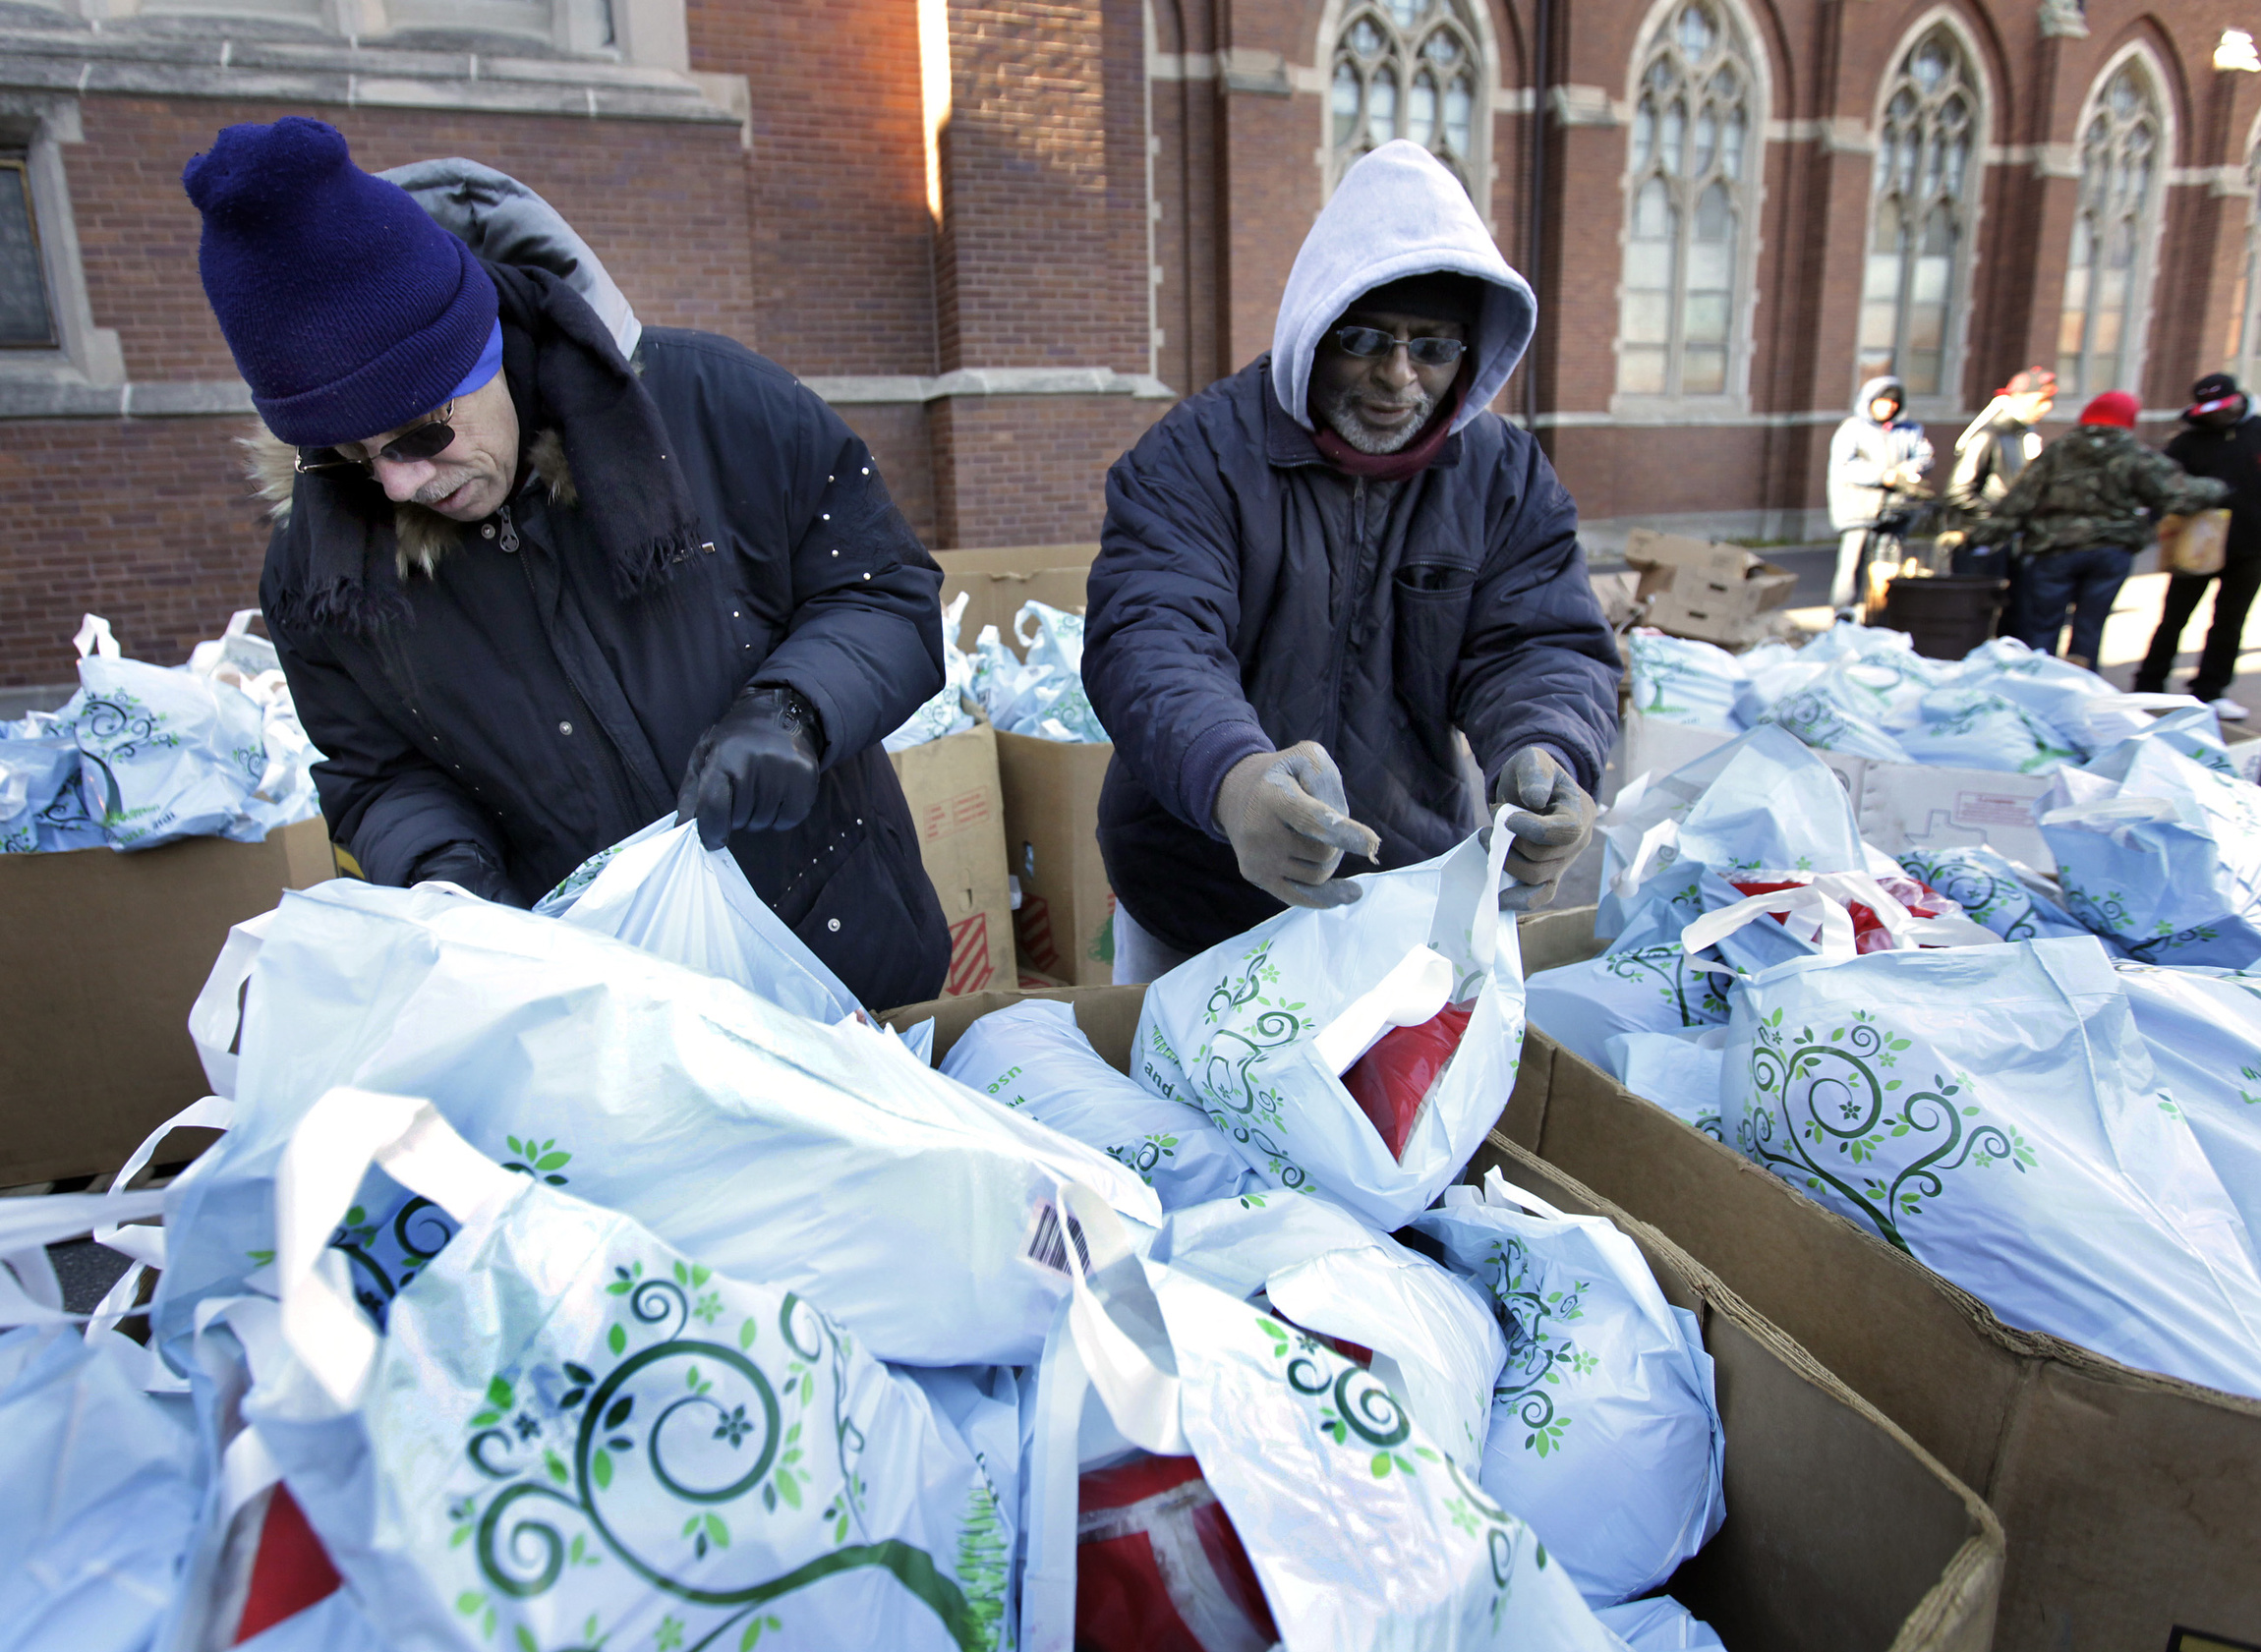 Parishioners Norman Smith and Richard King sort through turkeys to pass out to those in need Nov. 27 to feed near 600 families for Thanksgiving at St. Columbanus Church in Chicago. (CNS/Catholic New World/Karen Callaway)